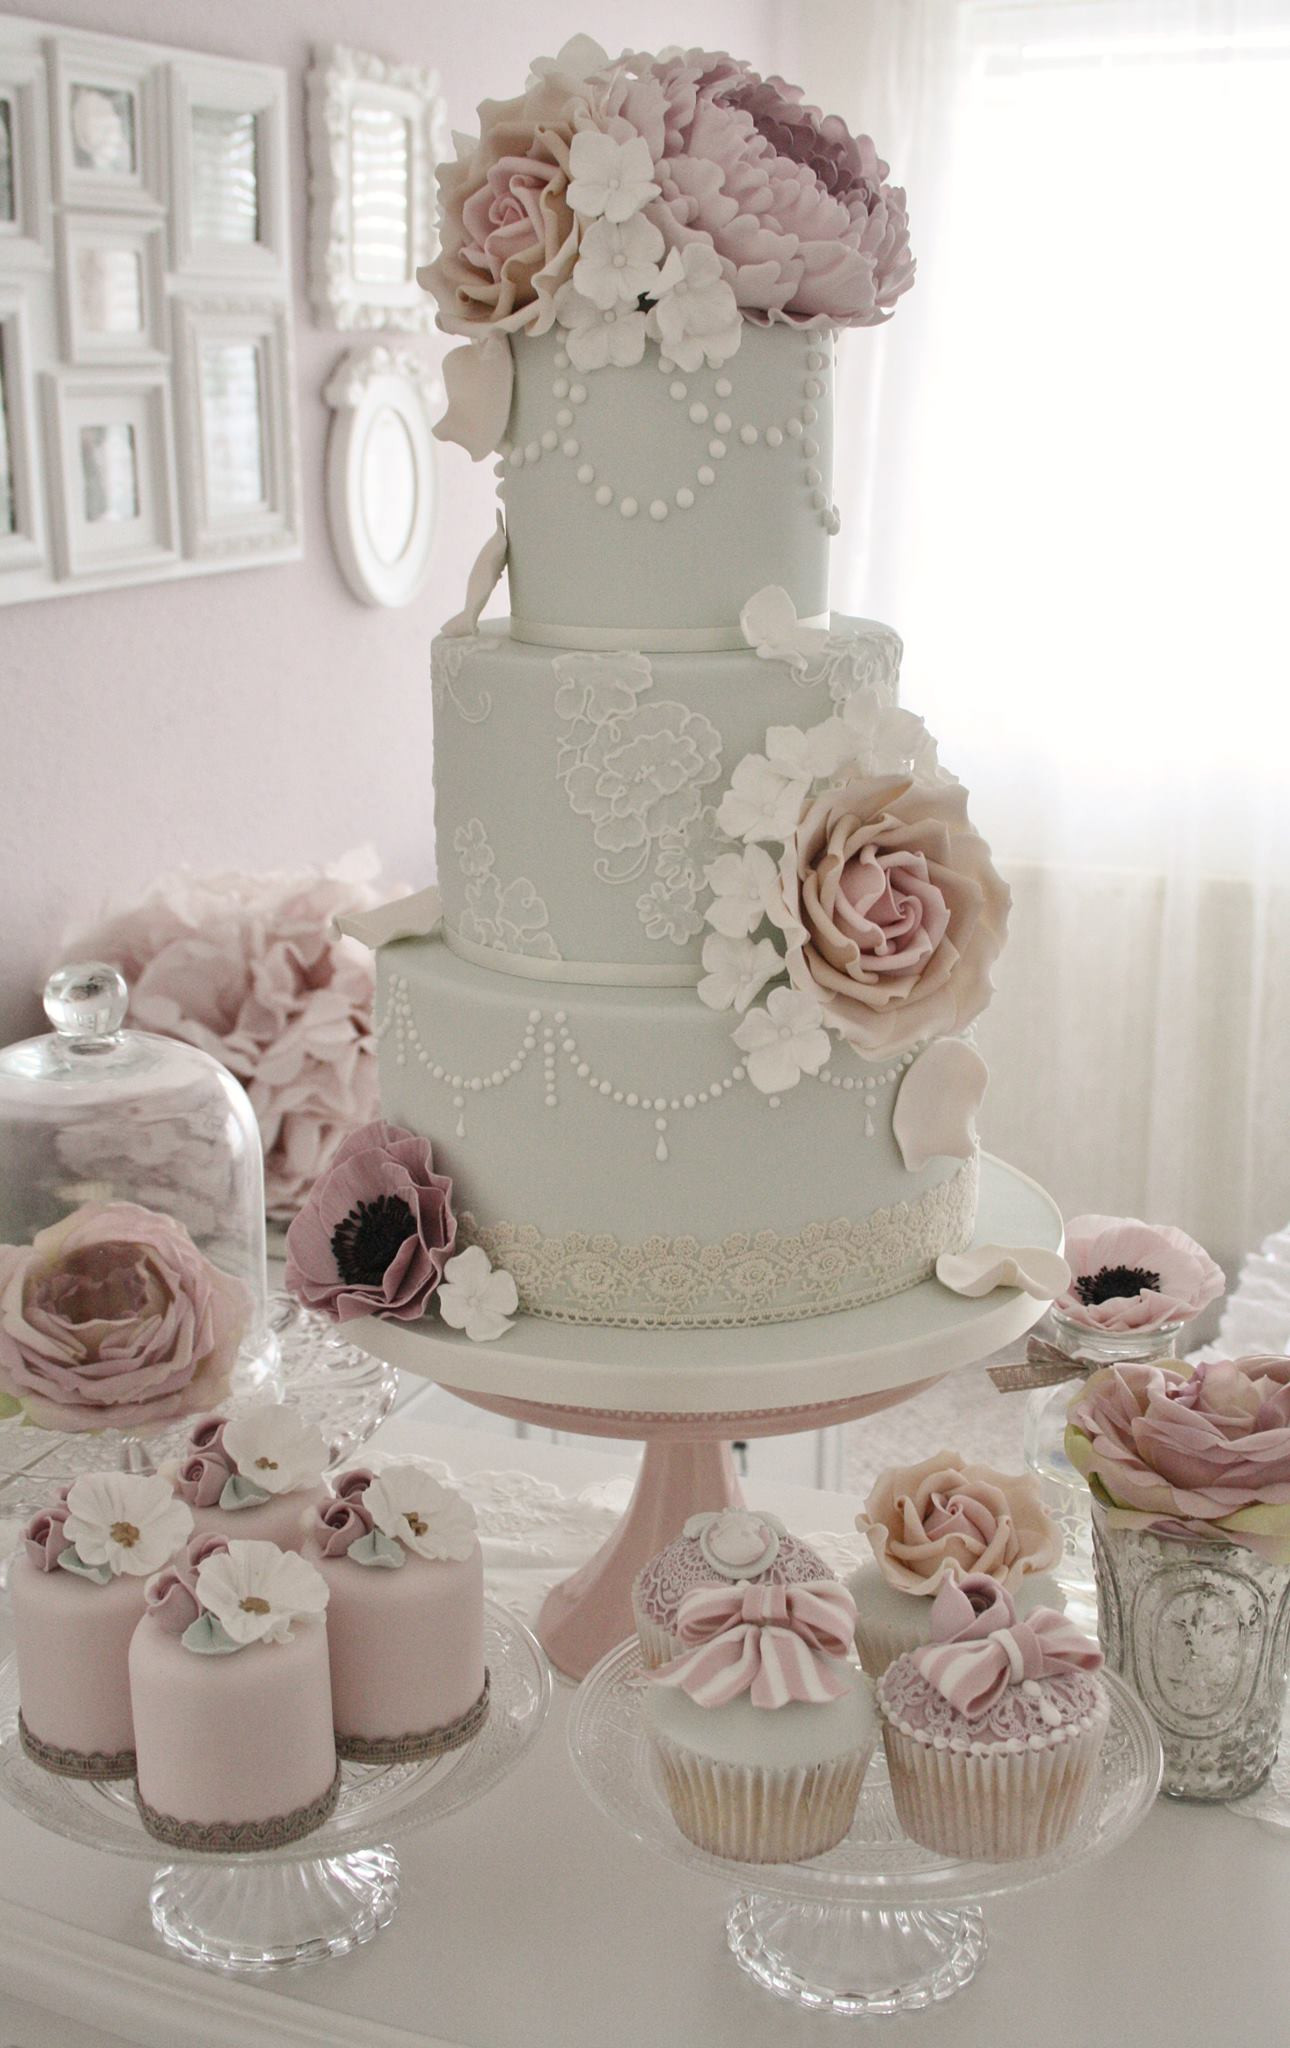 Wedding Cakes Designs 2020
 Wedding Cakes With Exceptional Details MODwedding